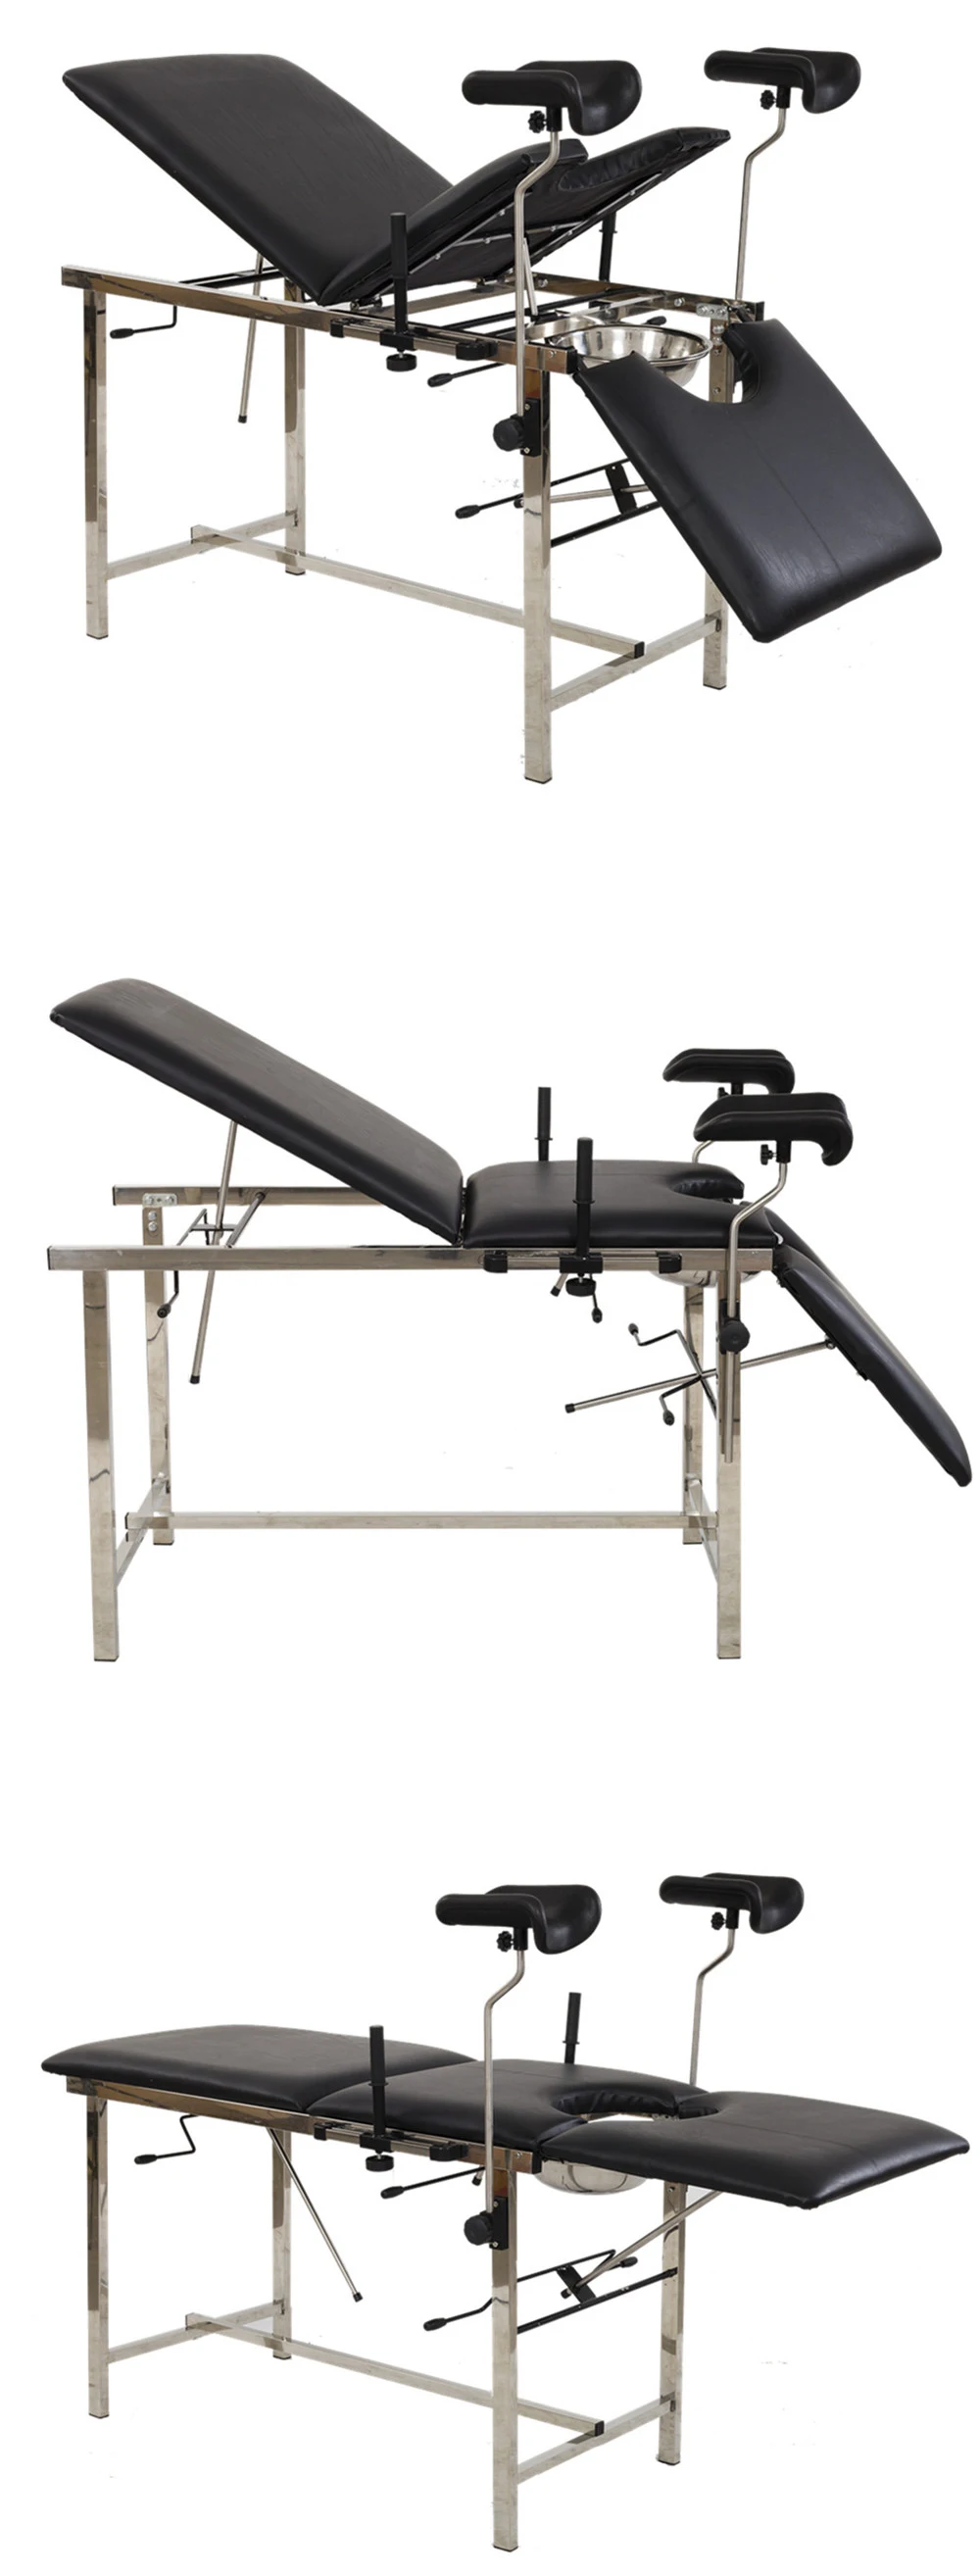 Adjustable Parturition Gynecological Examination Obstetrics Table